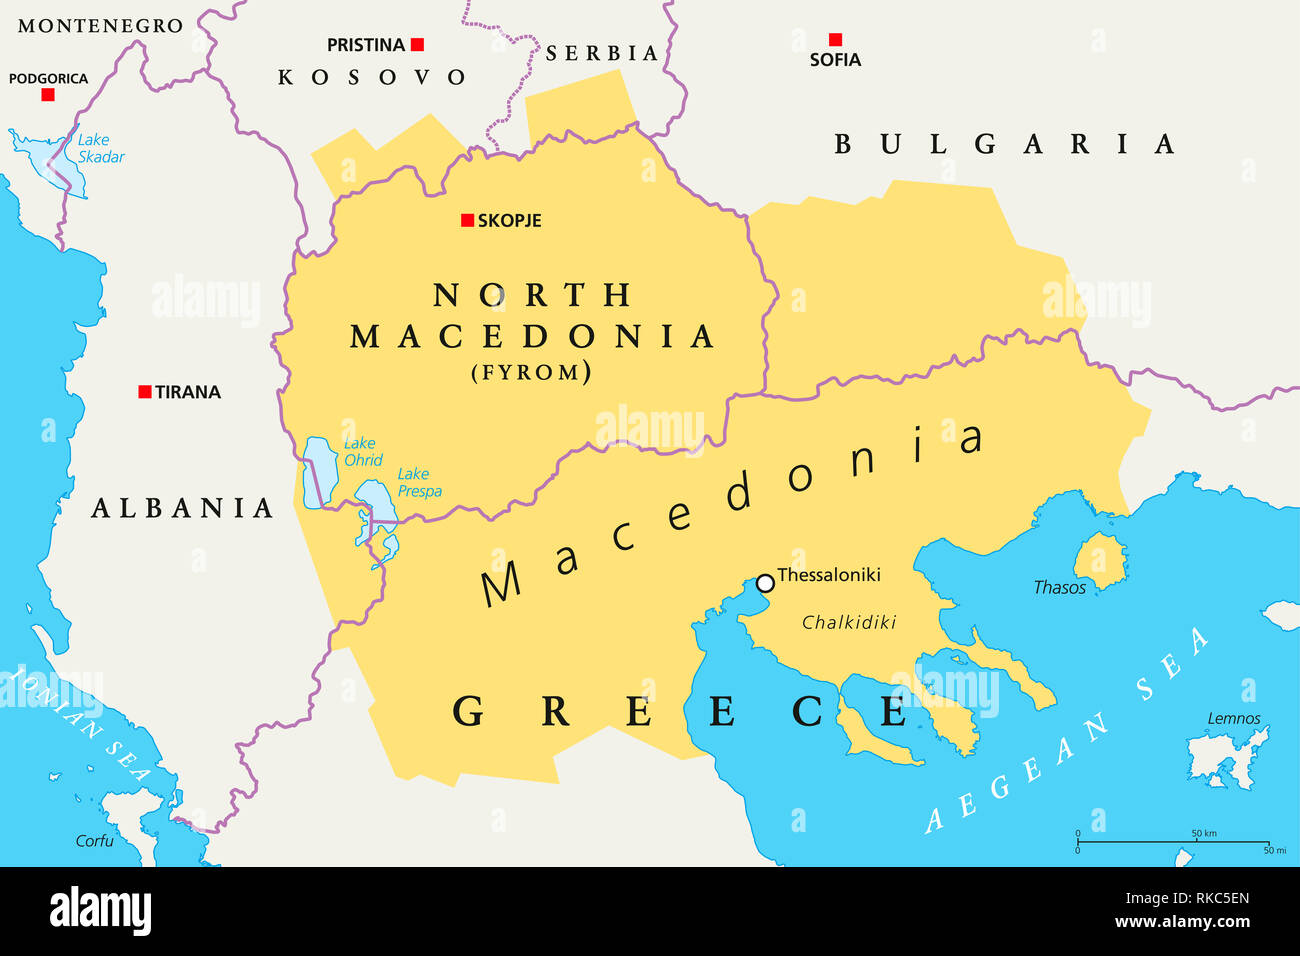 A List of Countries That Make up the Balkan Peninsula